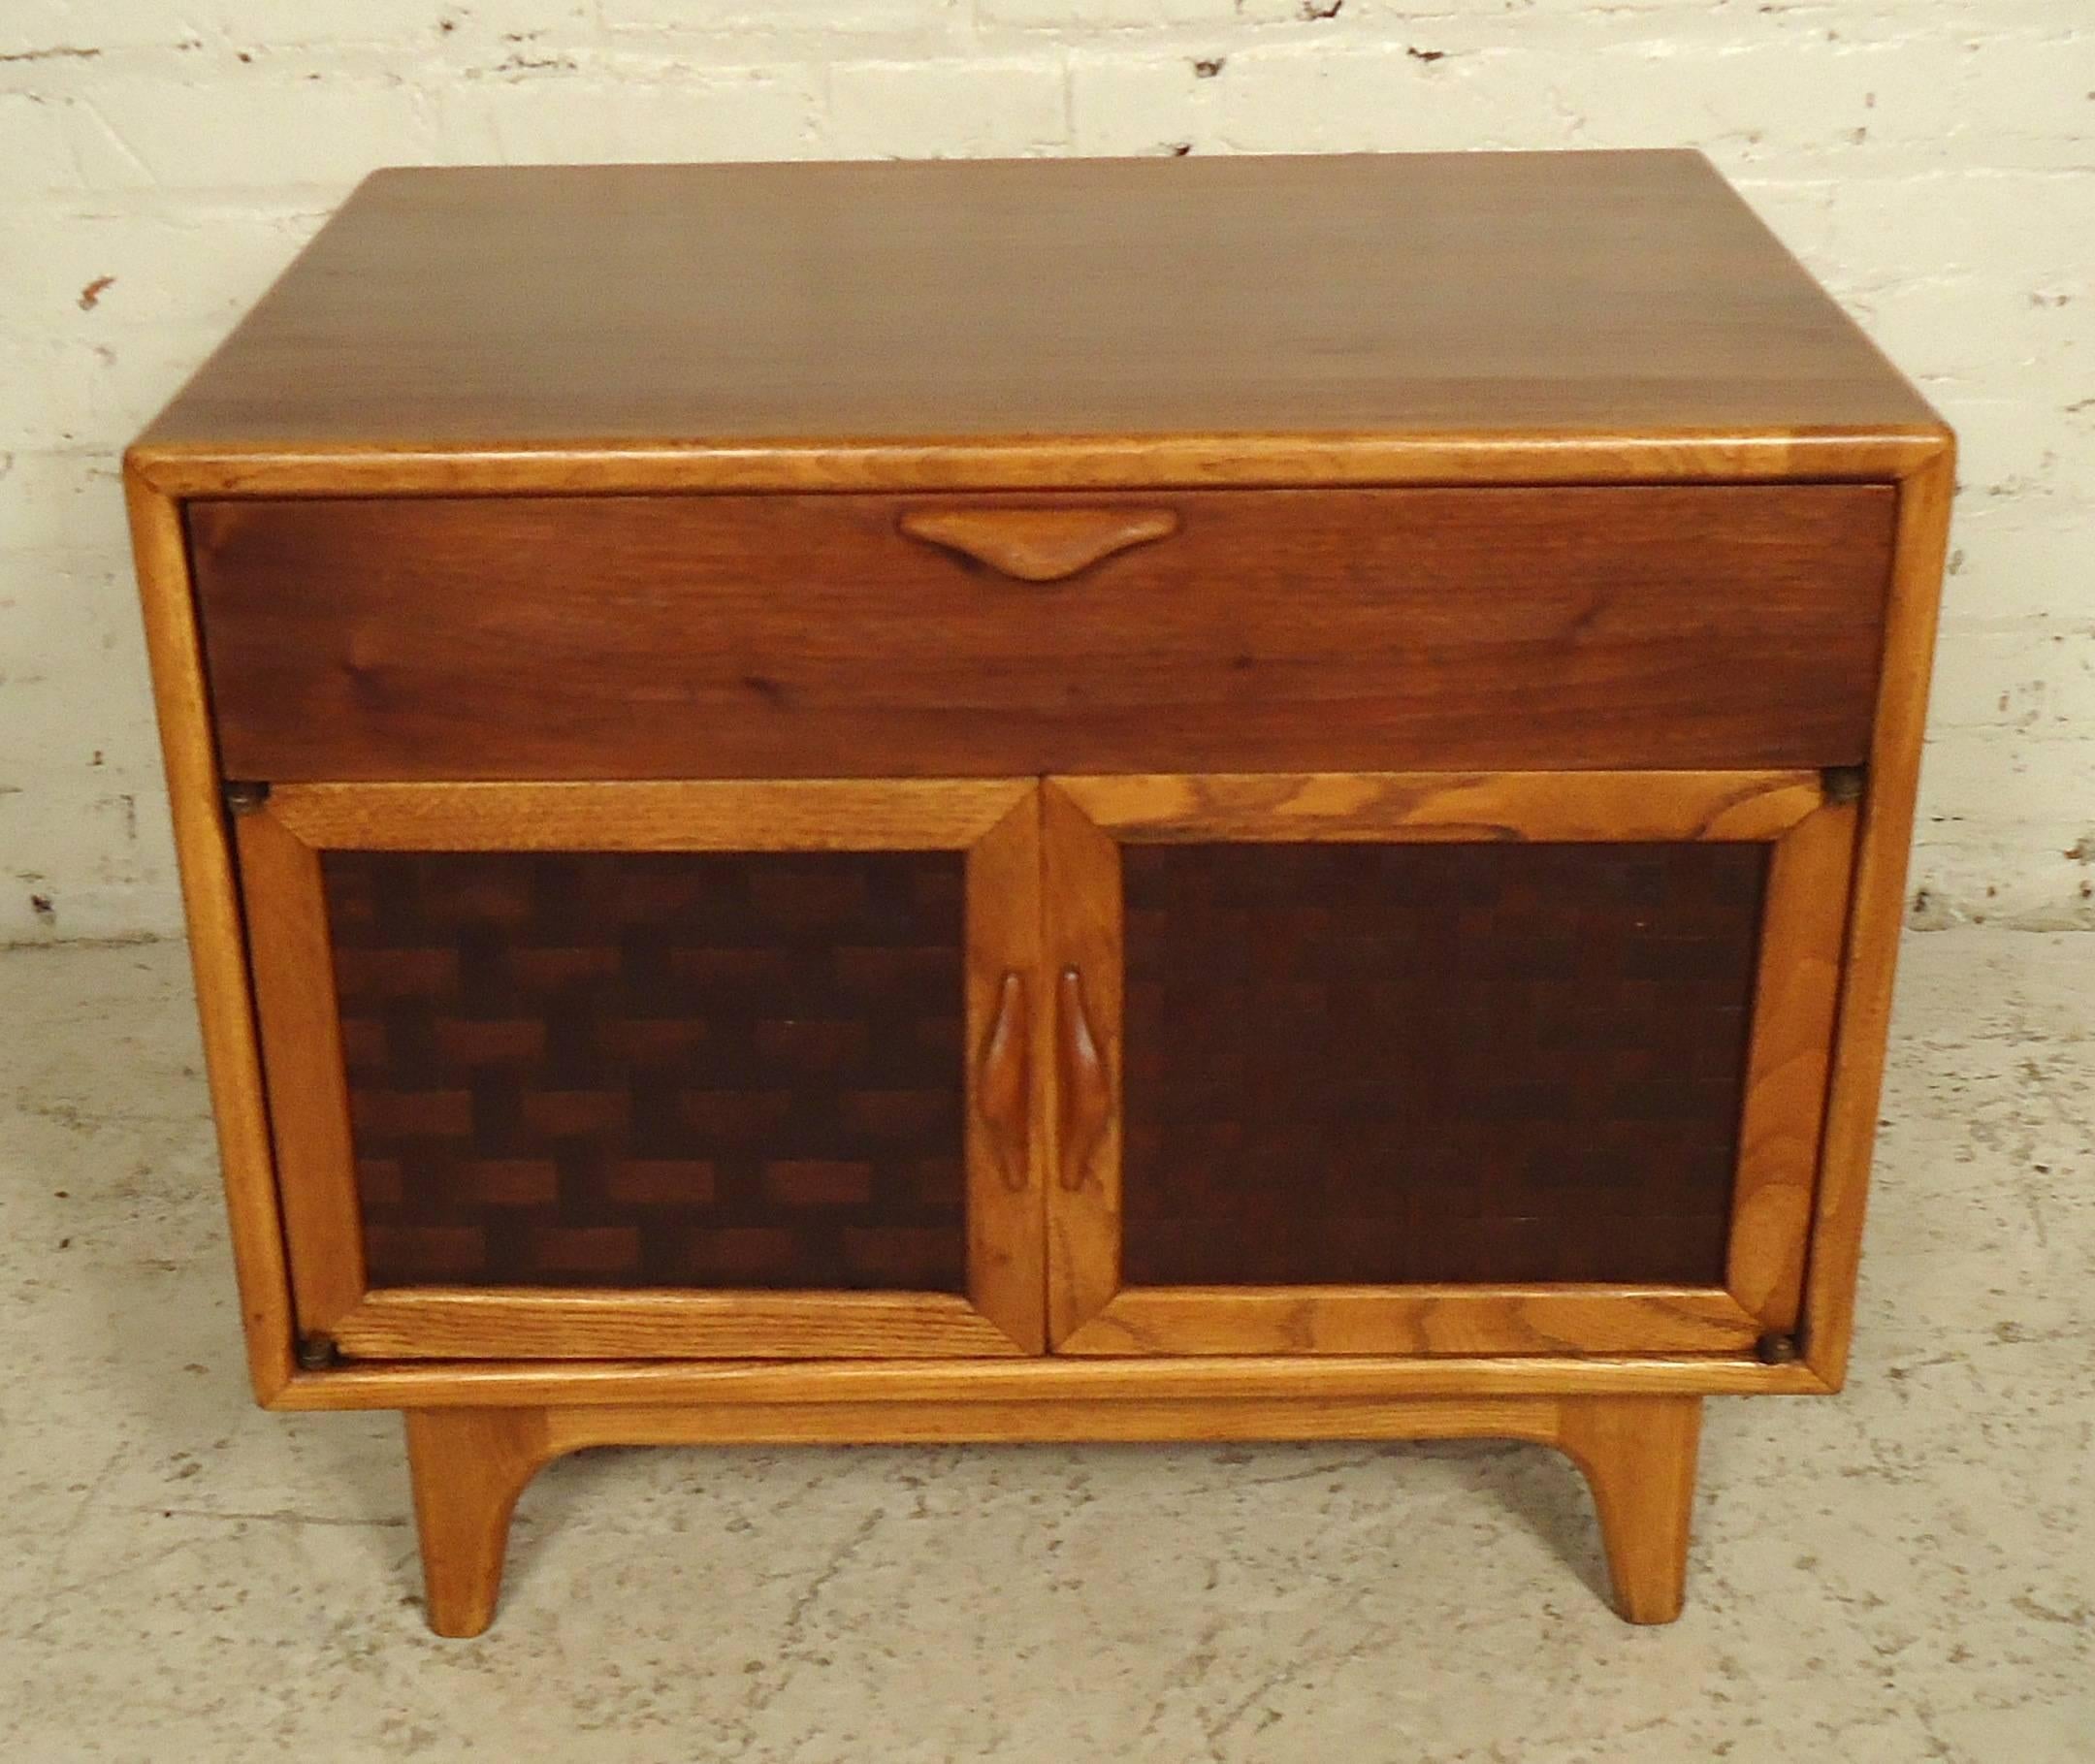 Elegant Mid-Century side table features a top drawer, bottom storage compartment and set of basket woven front doors on sturdy legs. Attractive oak and walnut accenting, as well as sculpted handles to add flair.
A great choice if you only have room